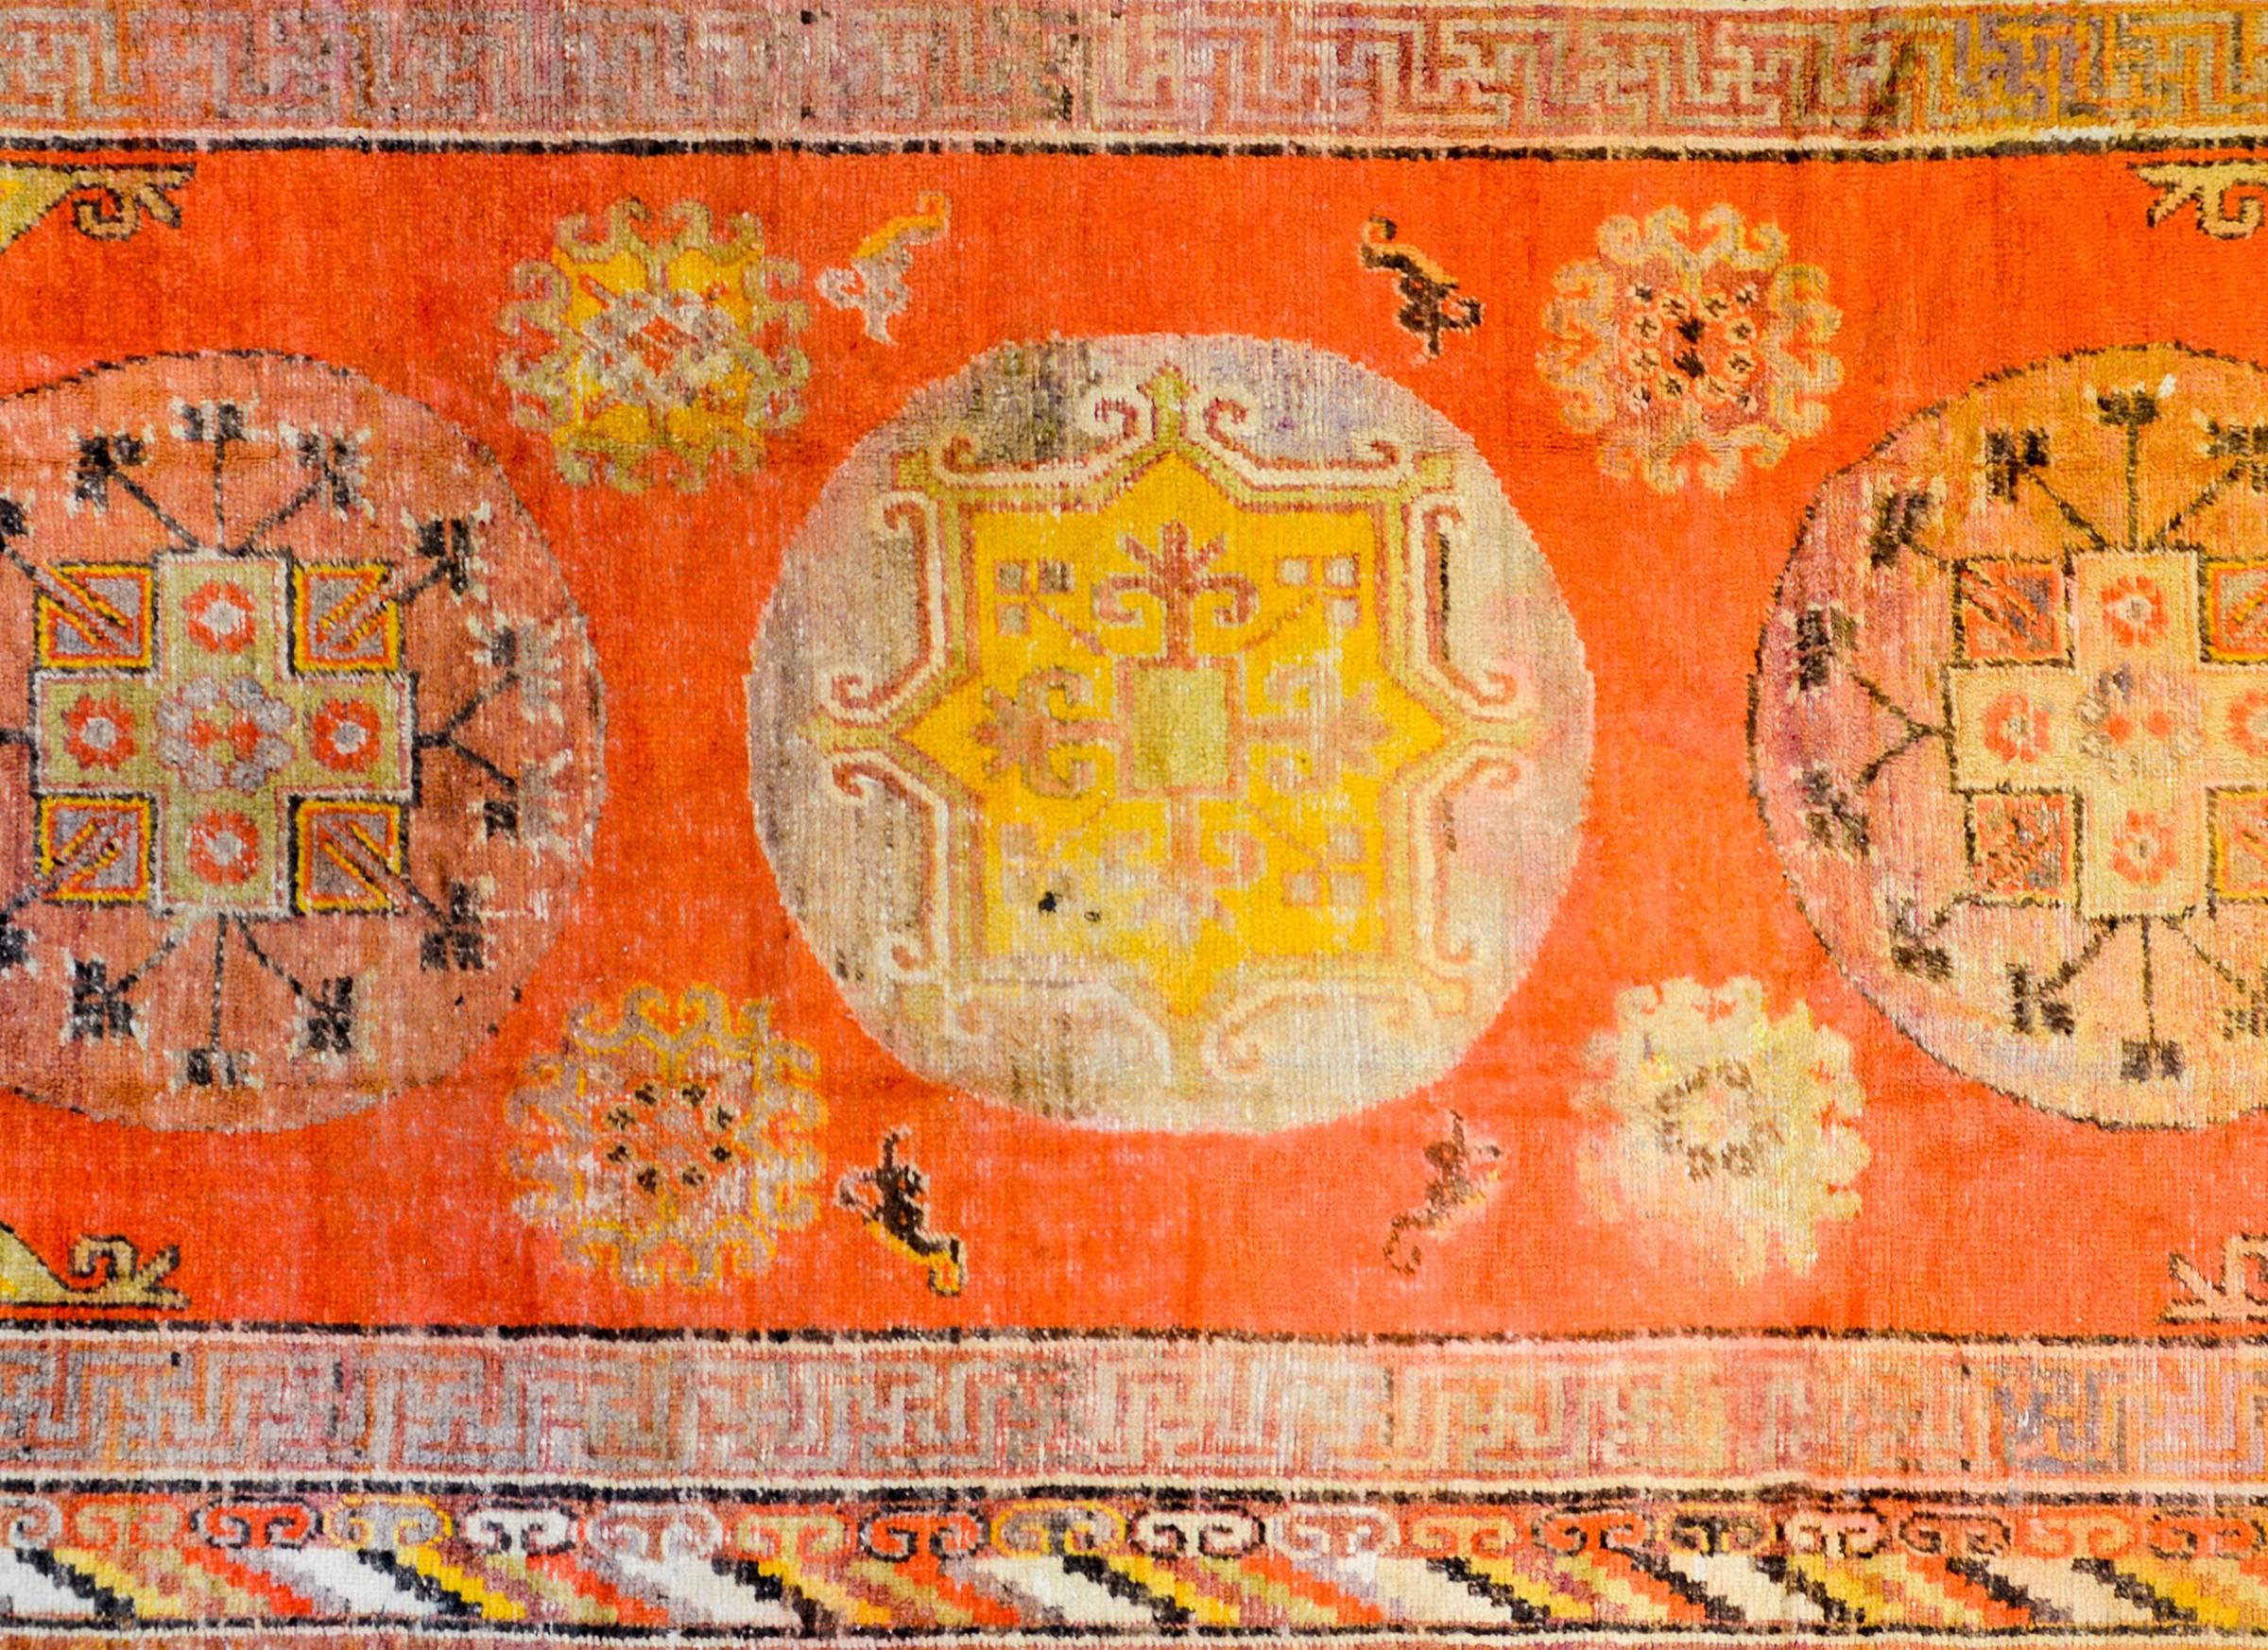 An amazing early 20th century Samarkand rug with three large circular medallions amidst an intense orange field of more medallions with floral and geometric patterns, surrounded by two distinct borders, an inner "meandering motif", and an